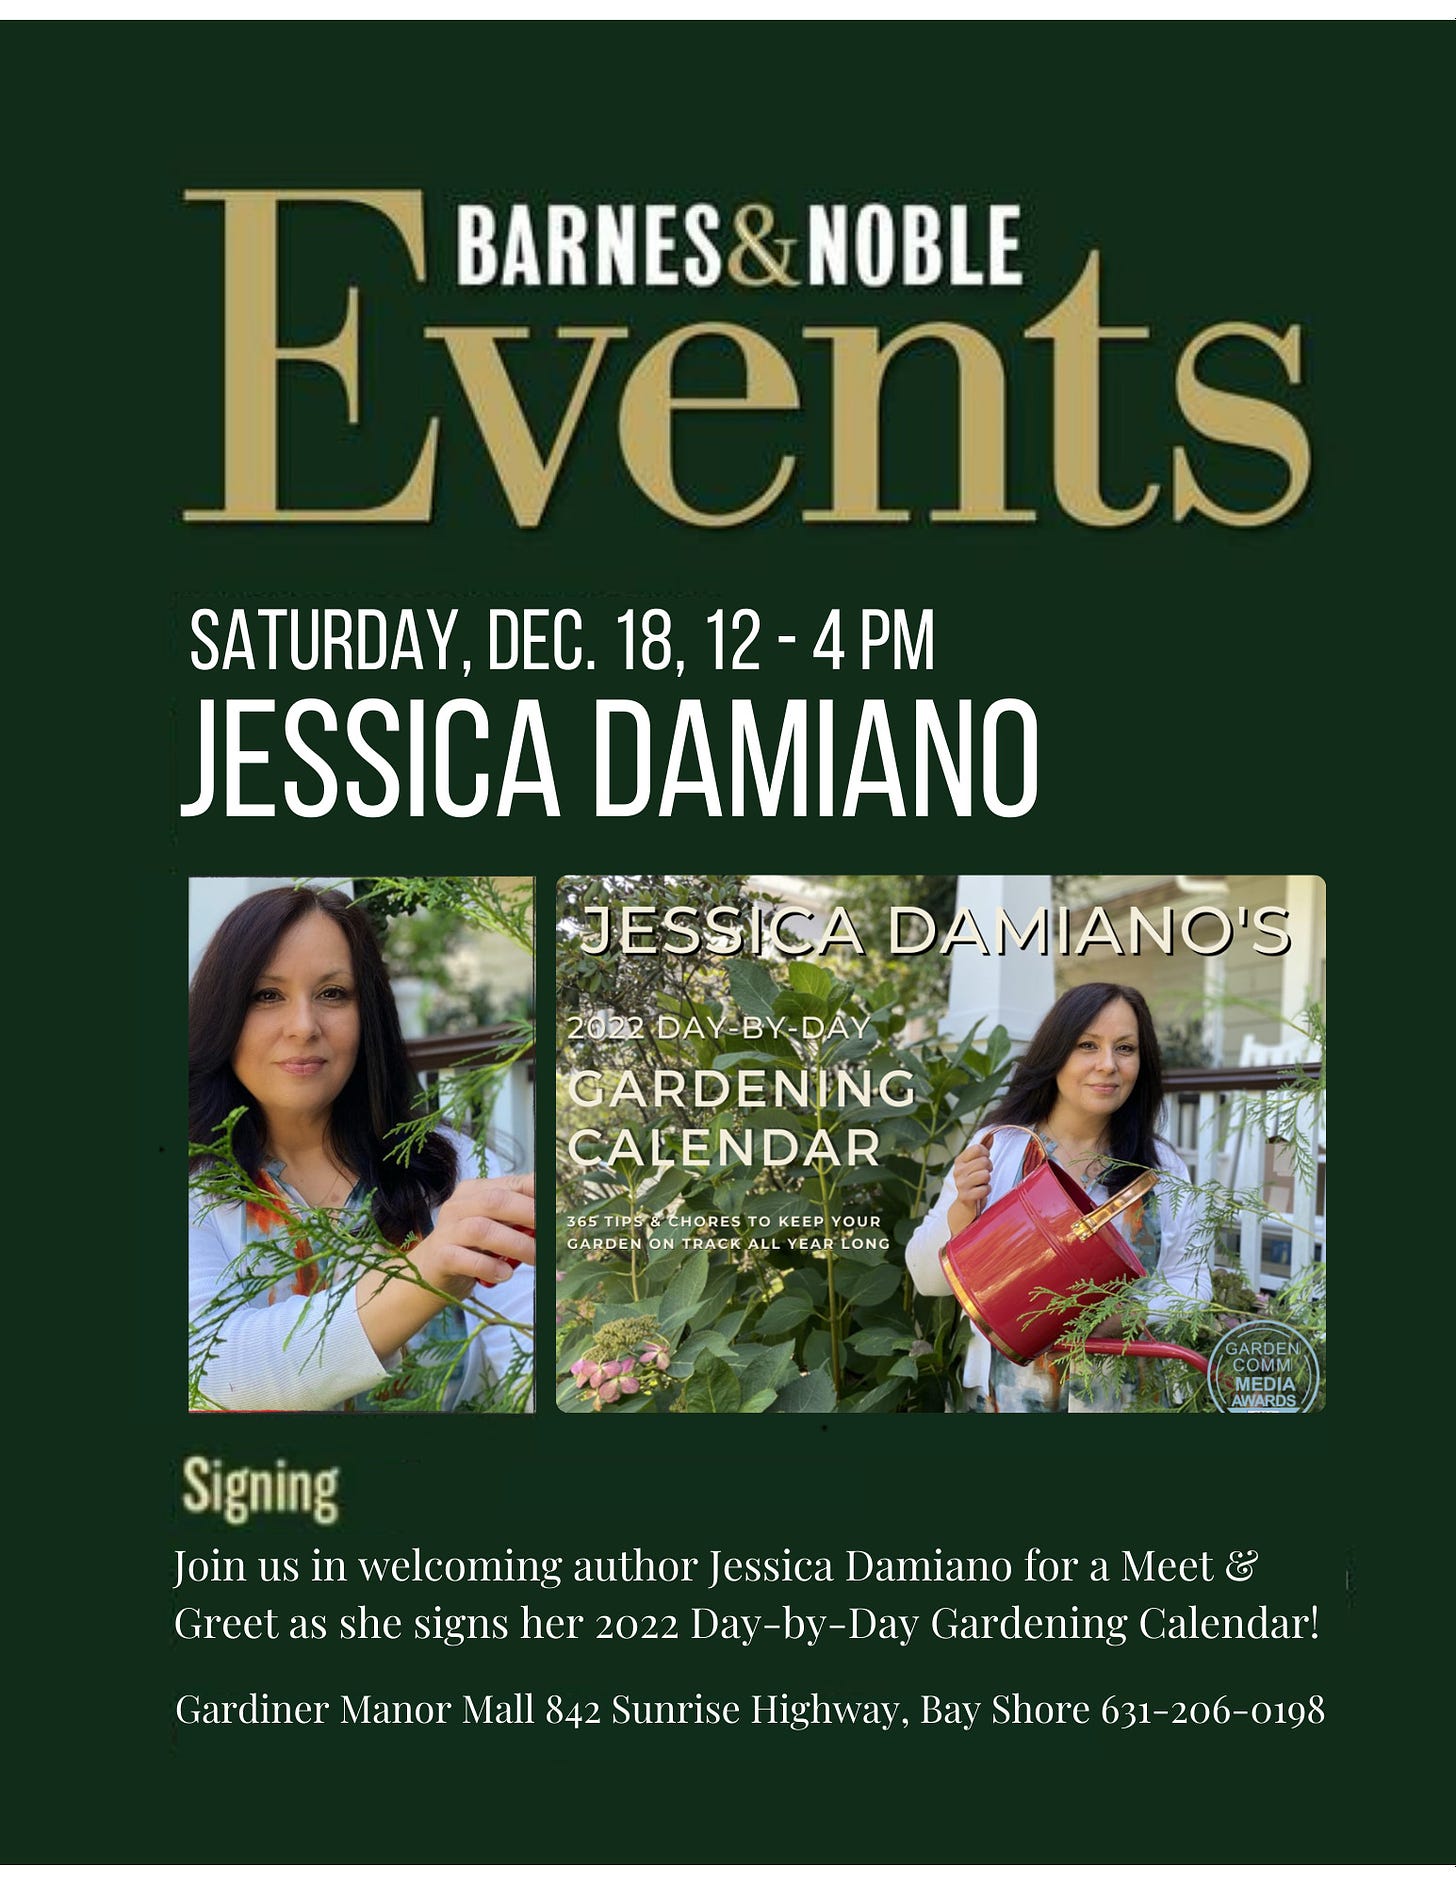 Meet the Author and Signing: Jessica Damiano